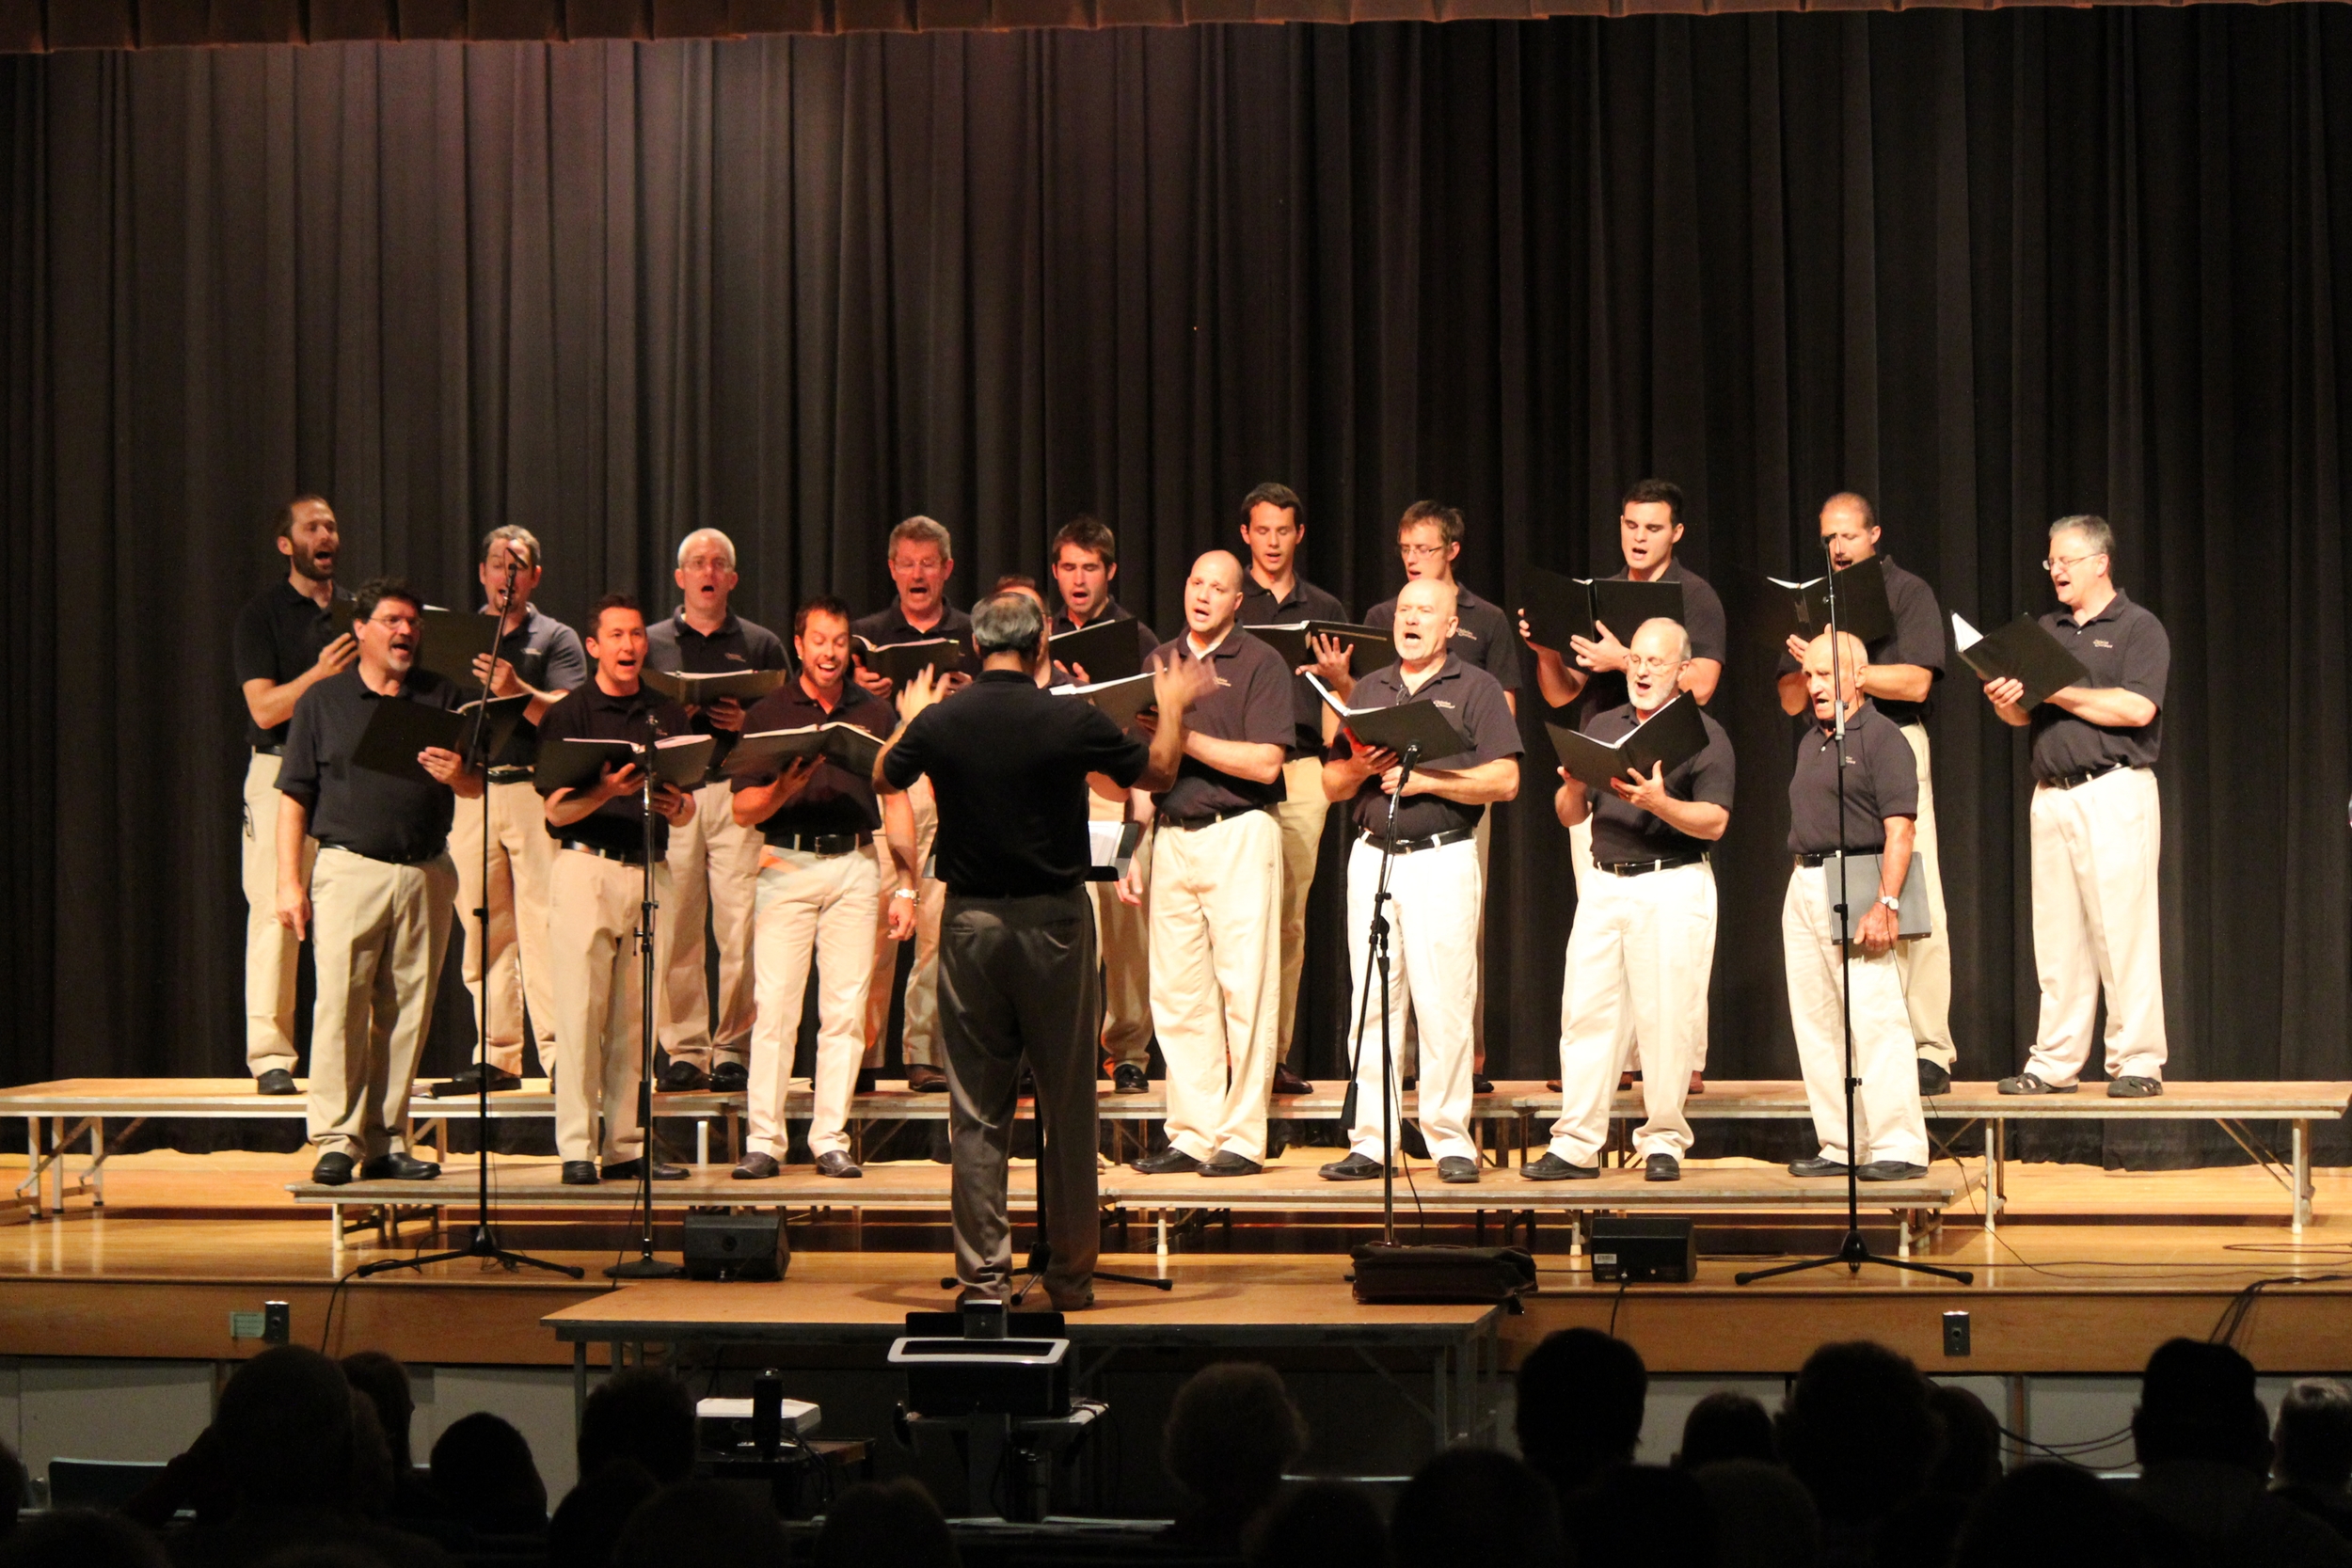  The Christian Choristers sang at the Union City High School on Saturday, September 13, 2014. 